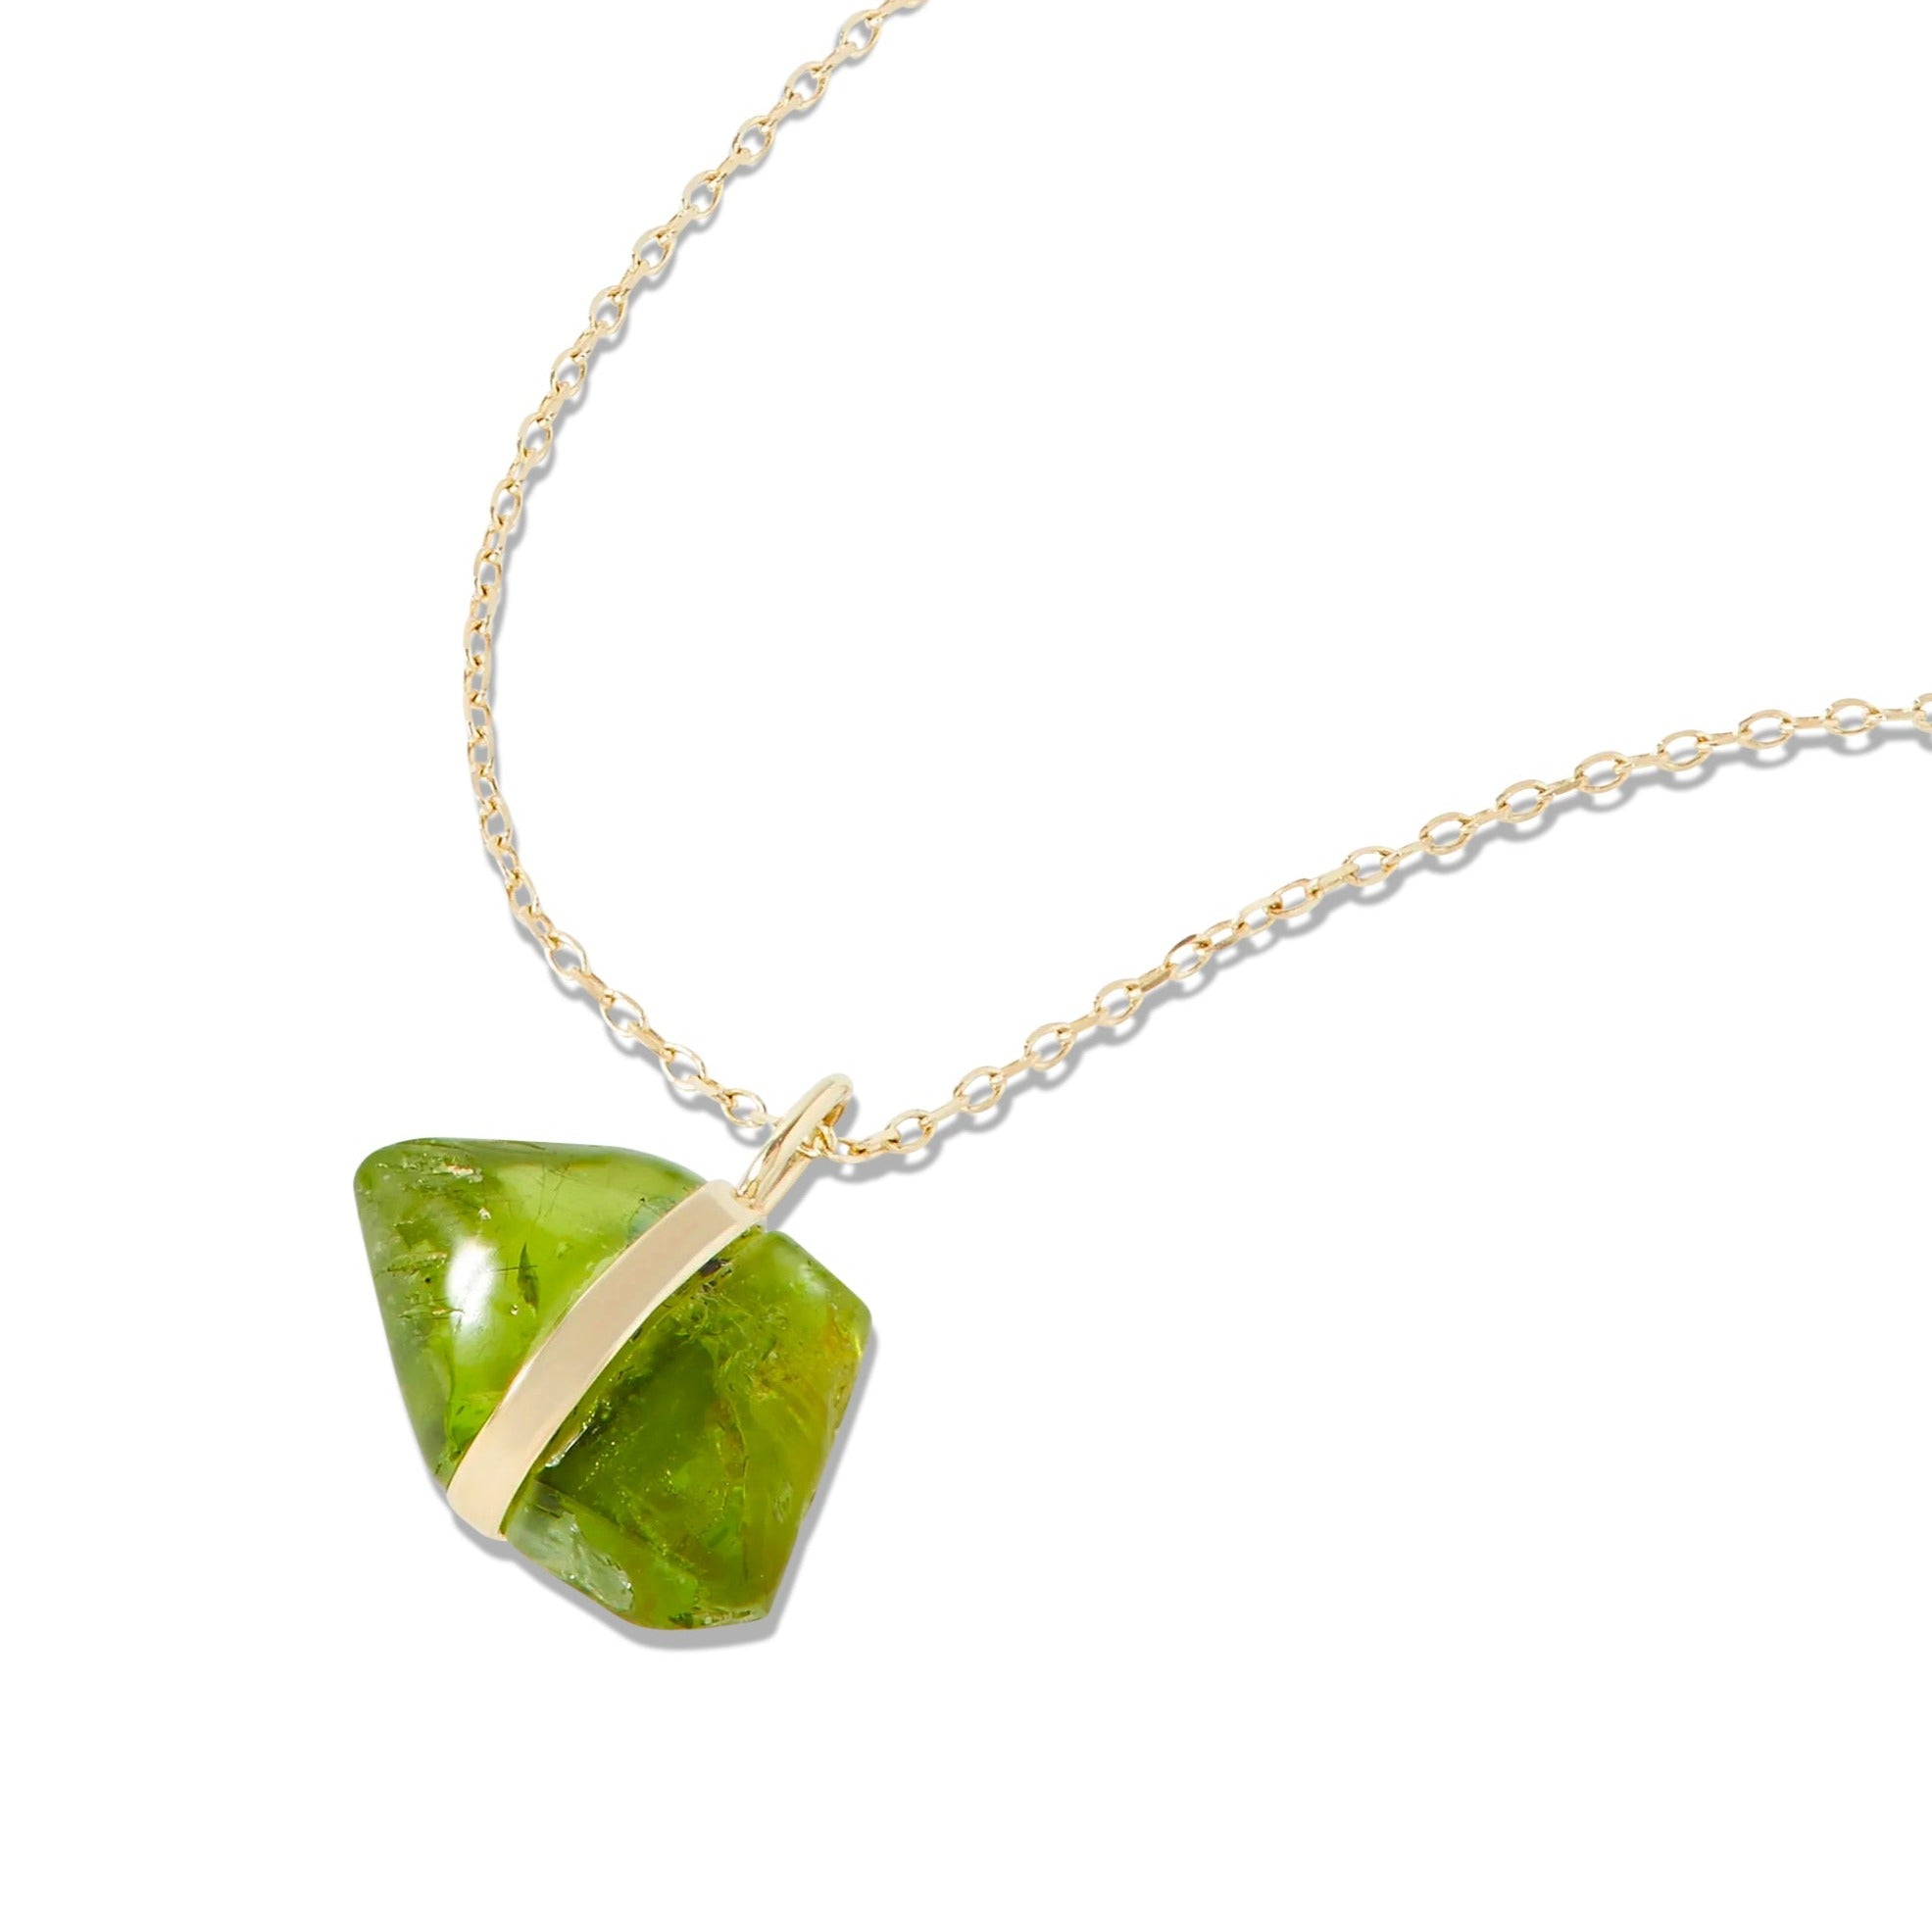 Gothic Peridot Swarovski Crystal Necklace – Char's Favorite Things